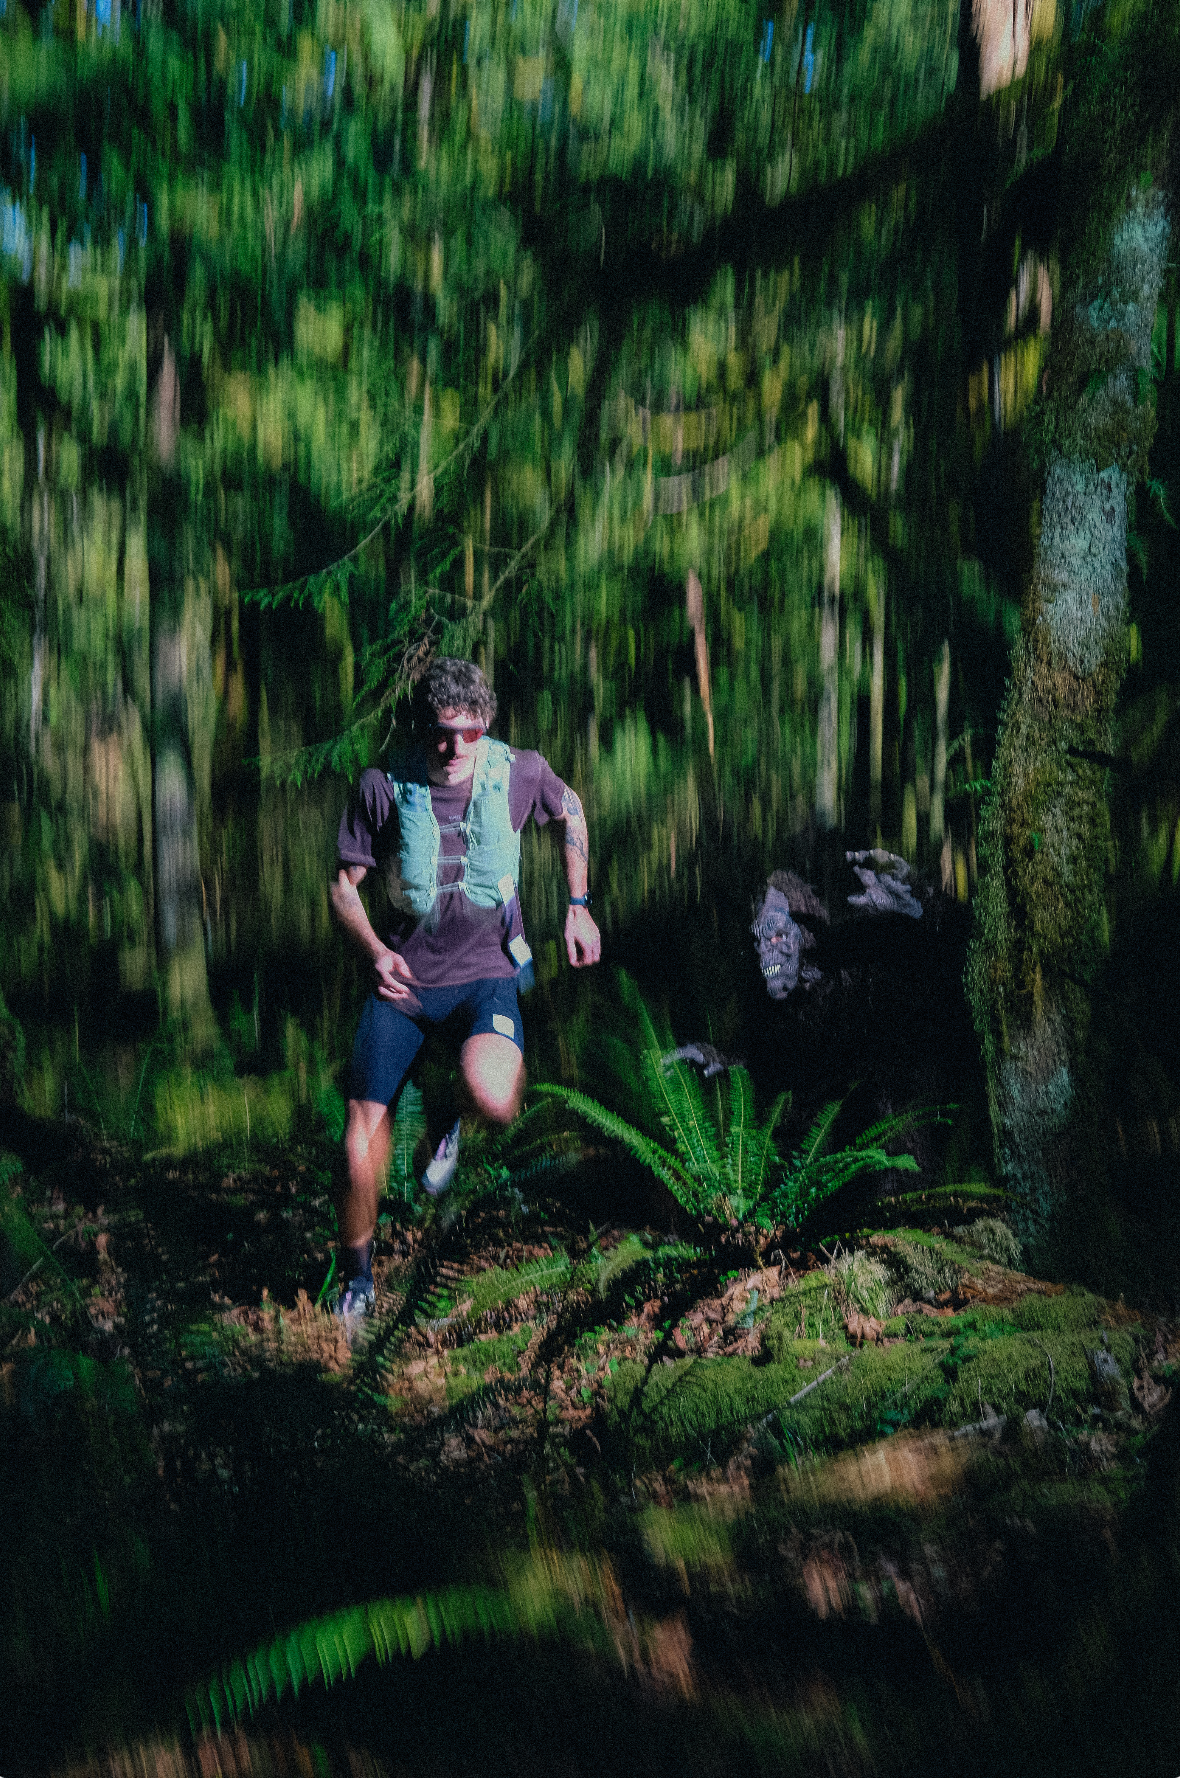 A man running in Satisfy from a lurking Sasquatch